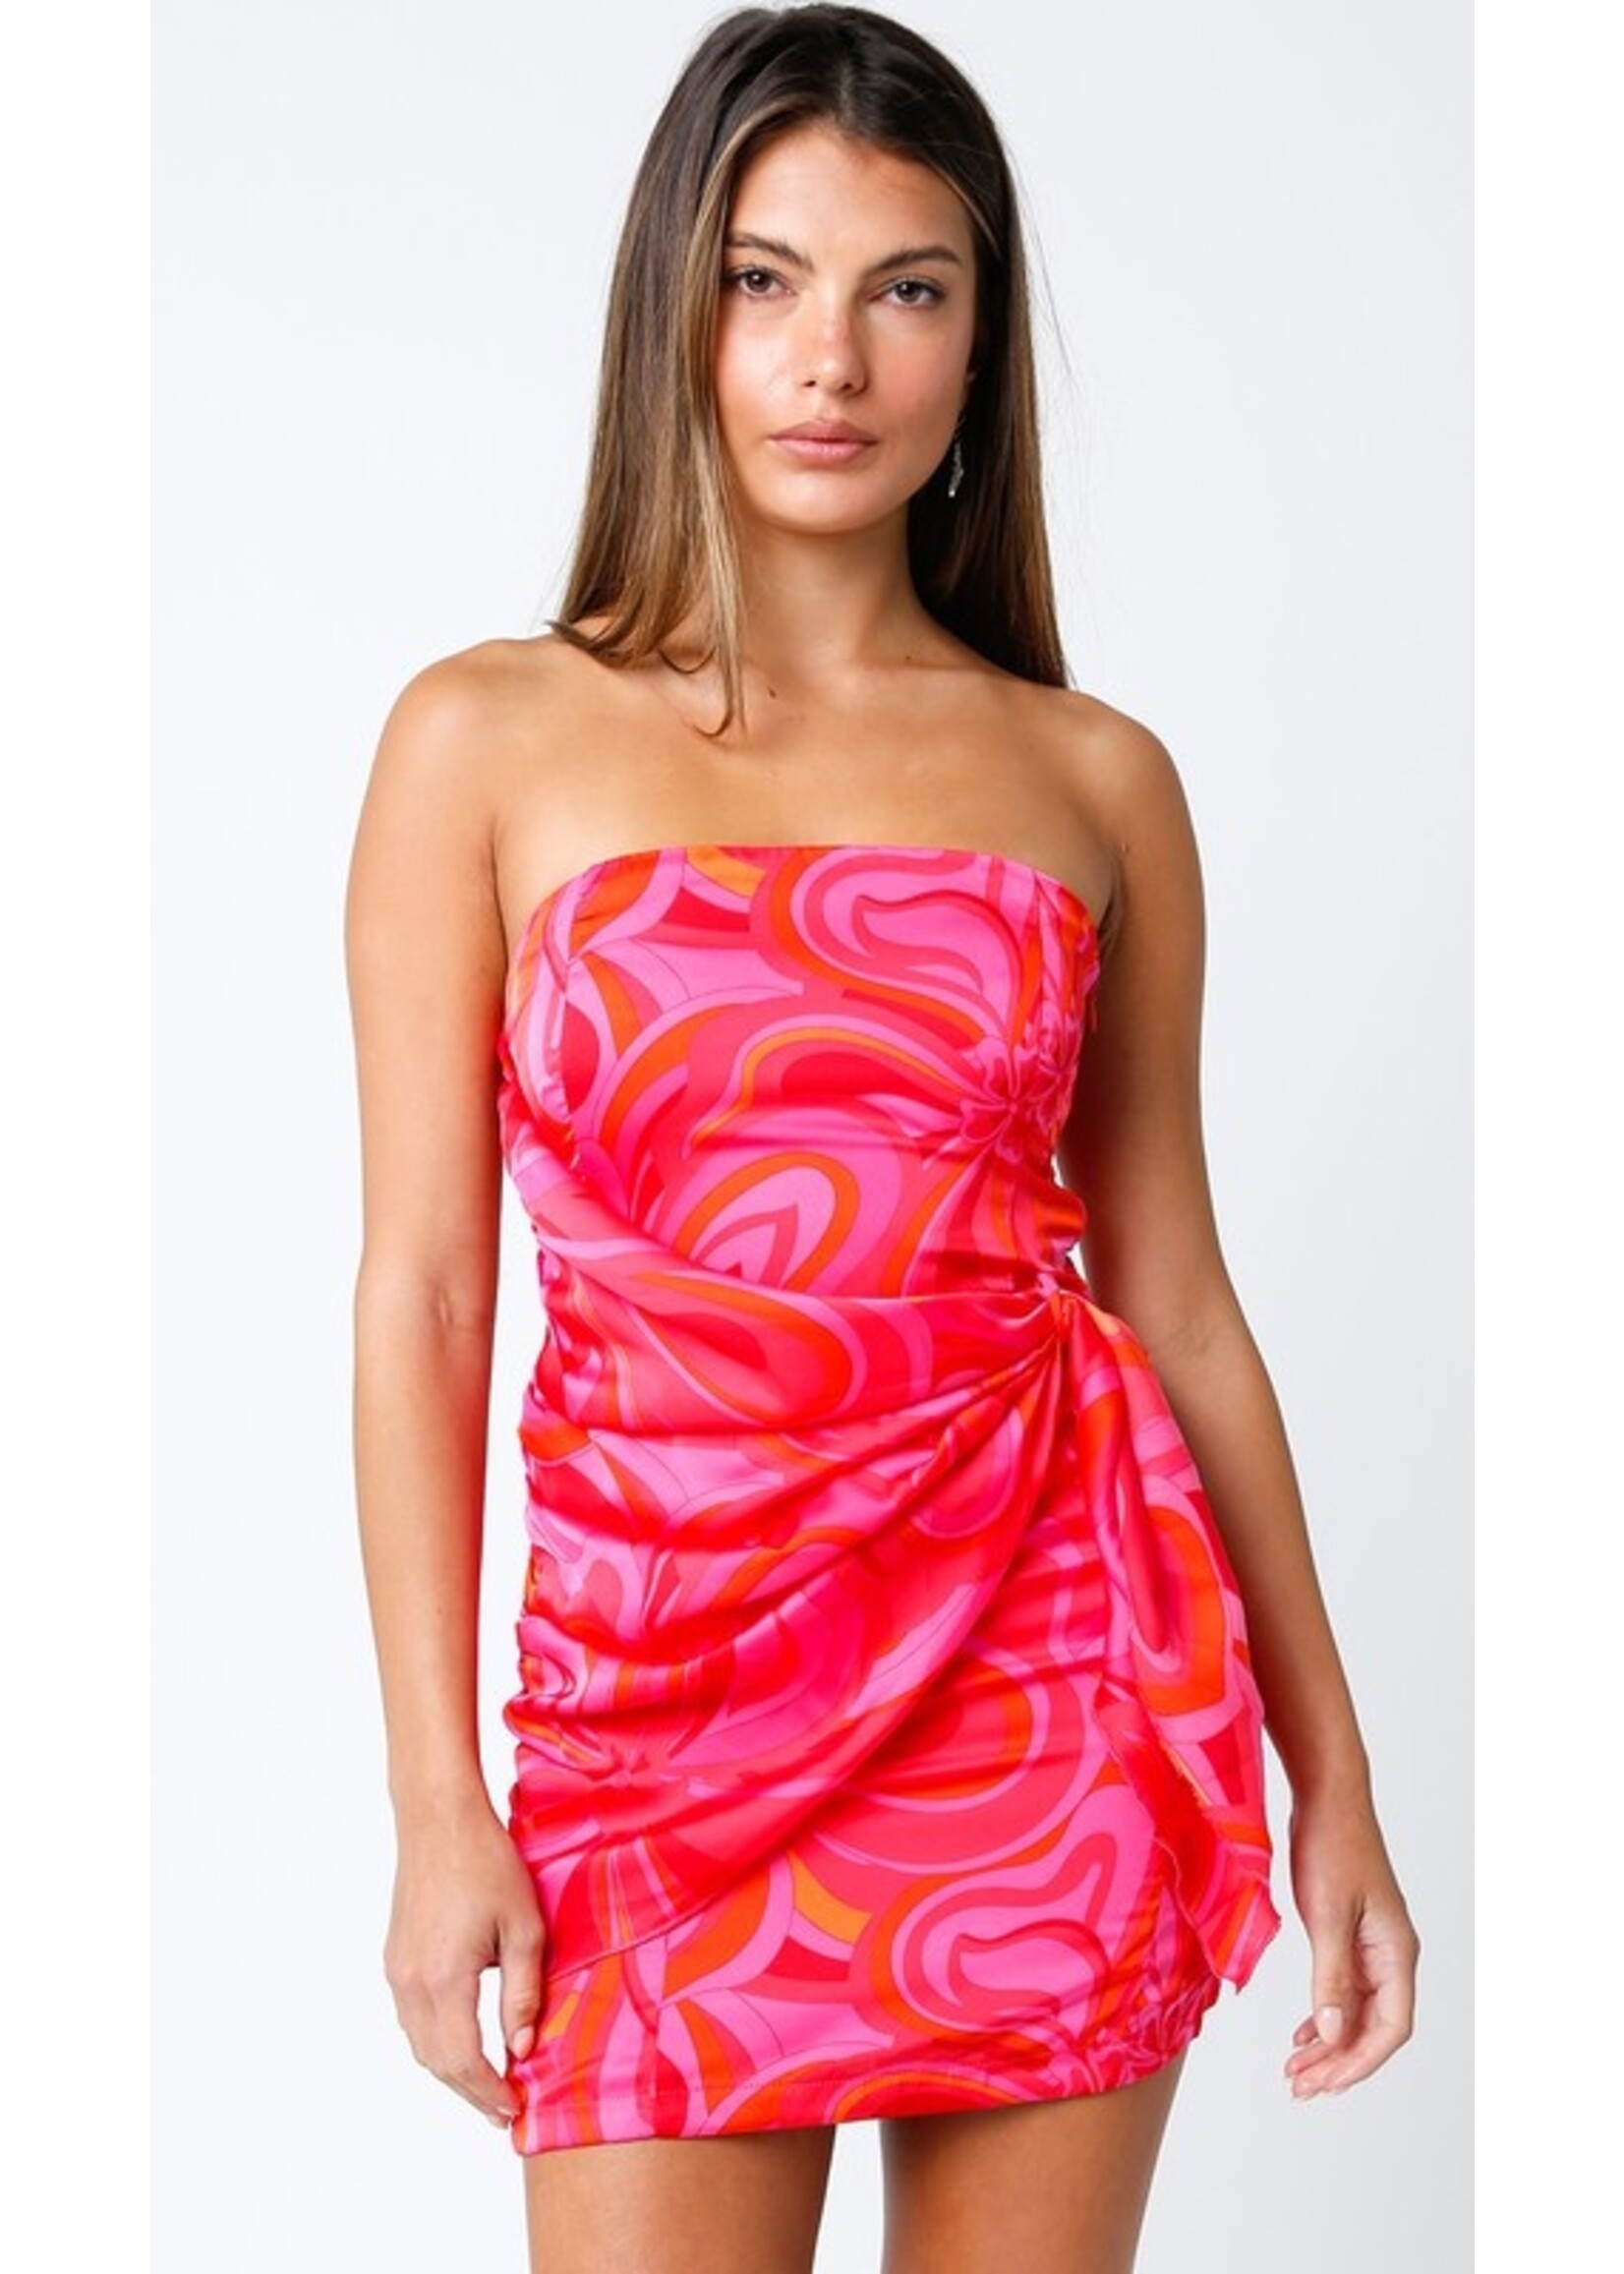 Olivaceous Olivaceous Strapless Fuchsia Dress